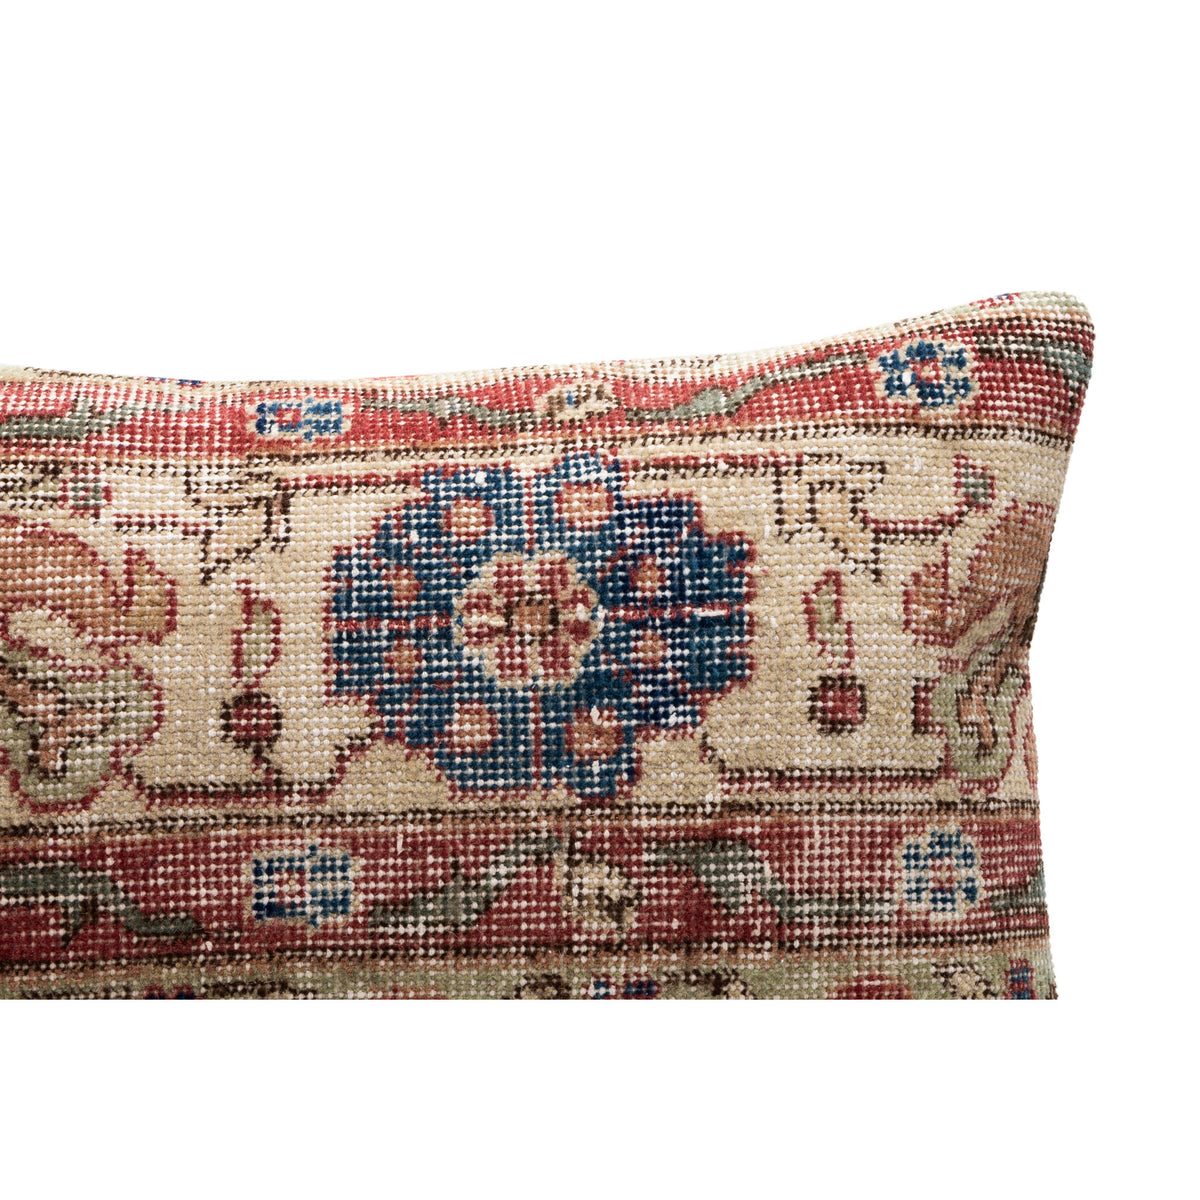 Decorative Rug Pillow Cover 16" x 24"